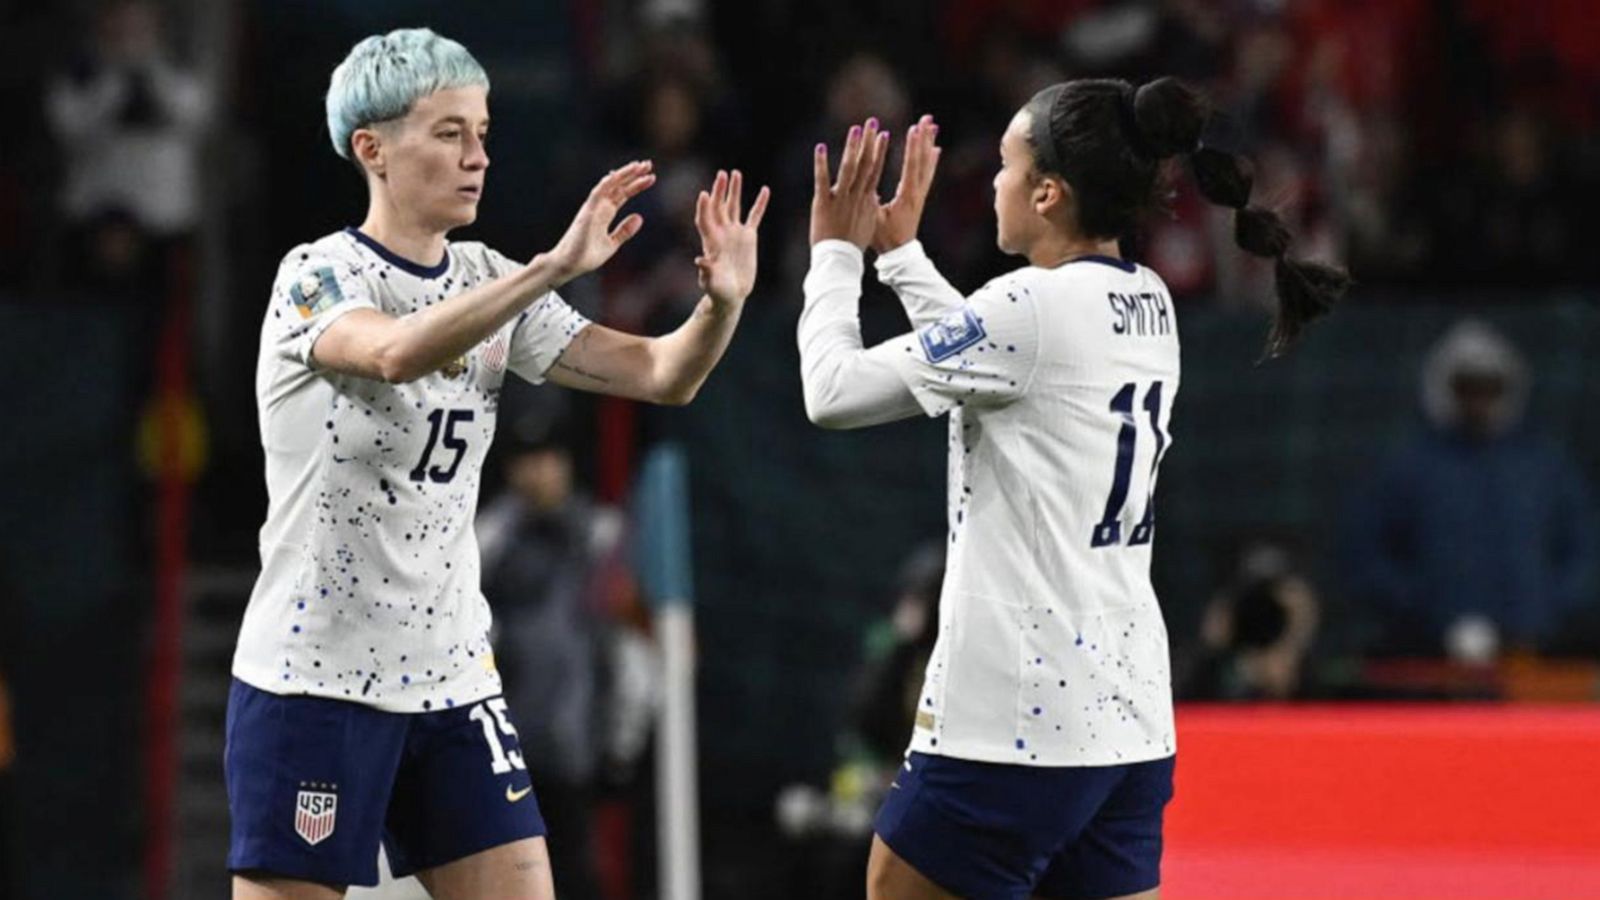 VIDEO: USWNT advances in World Cup after Portugal match ends in draw